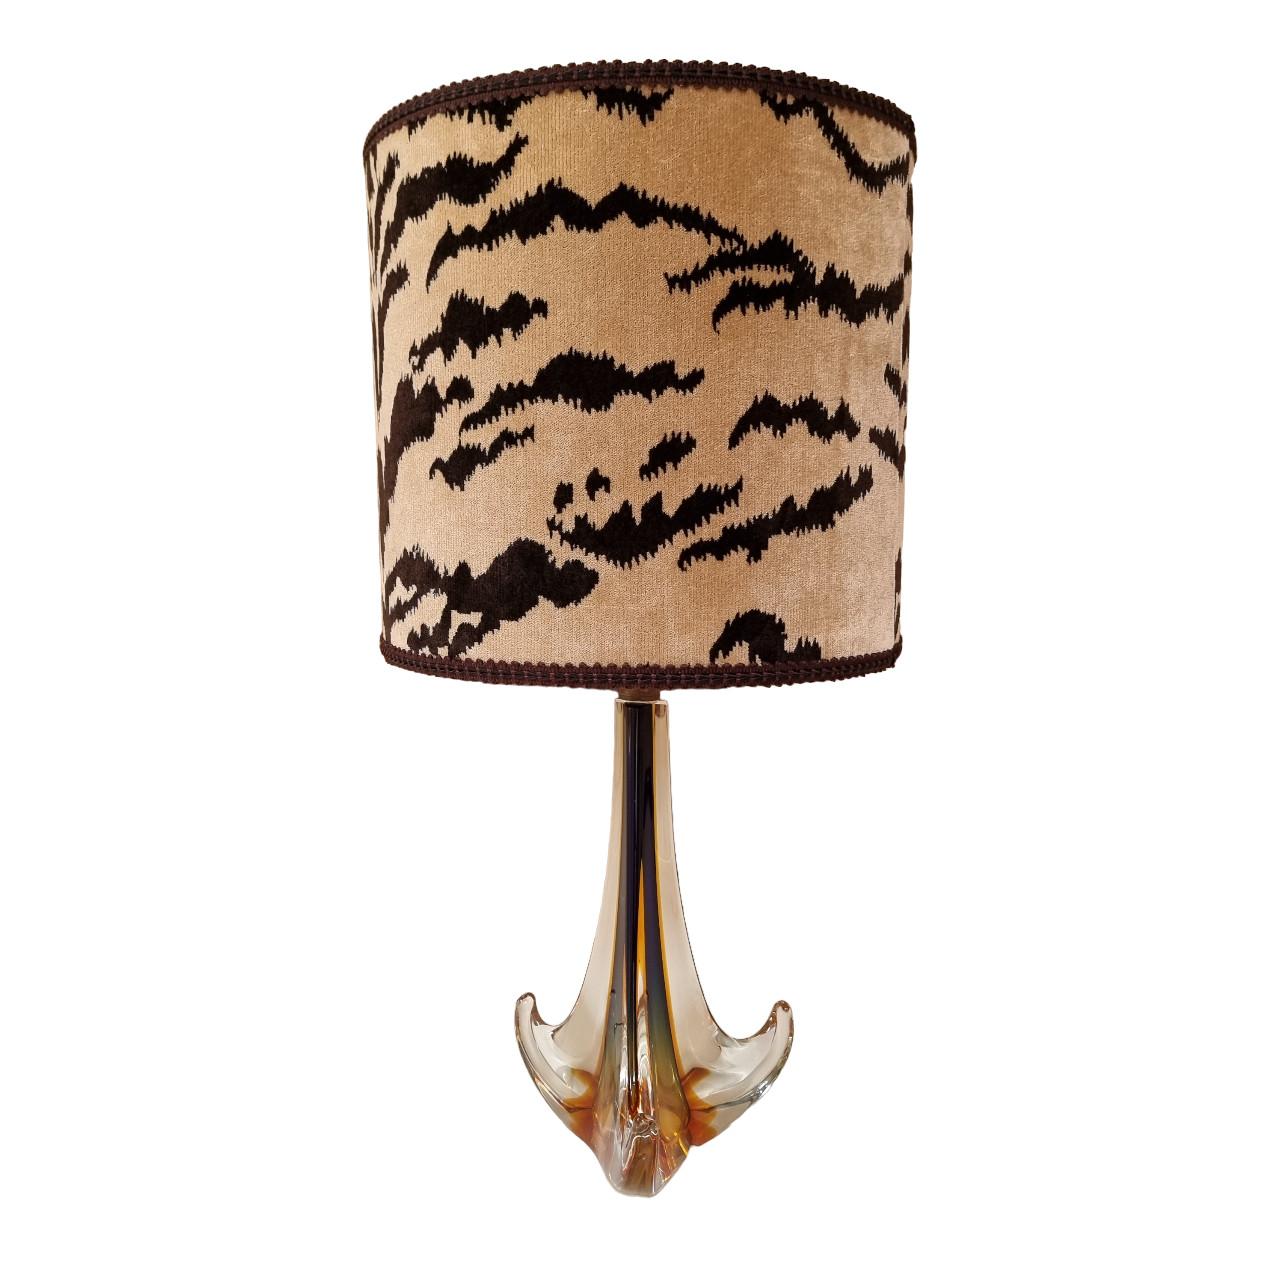 Mid-Century Modern Mid-20th Century Murano Glass Table Lamp with Bevilacqua Tigre Velvet Lampshade For Sale